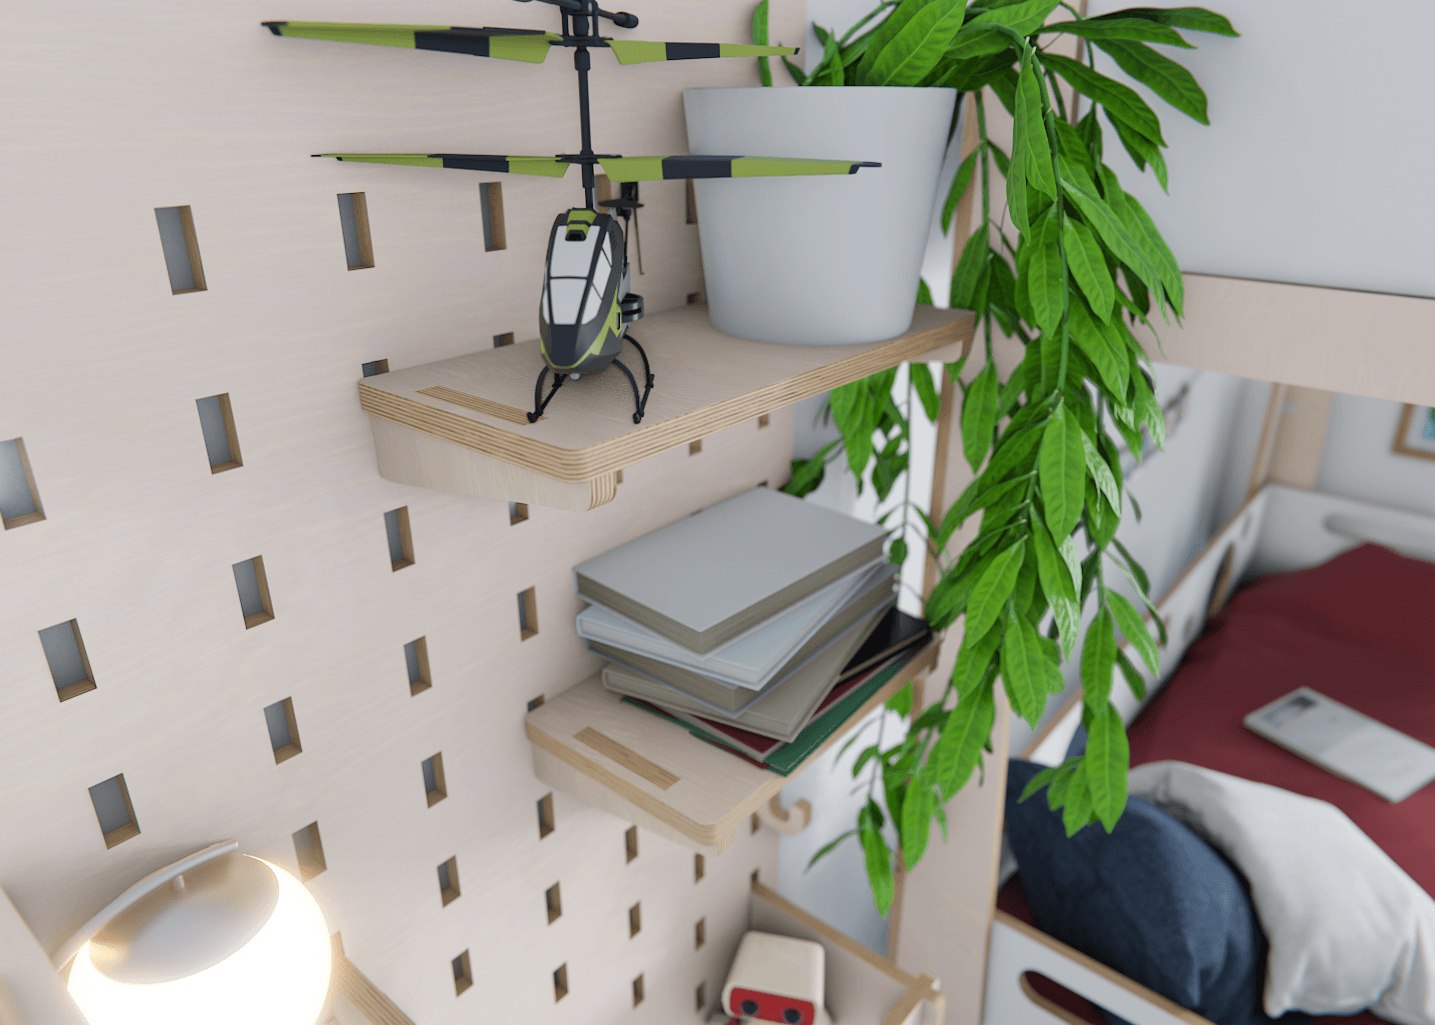 From books to decor - our pegboard shelf offers ample space. Style meets function.